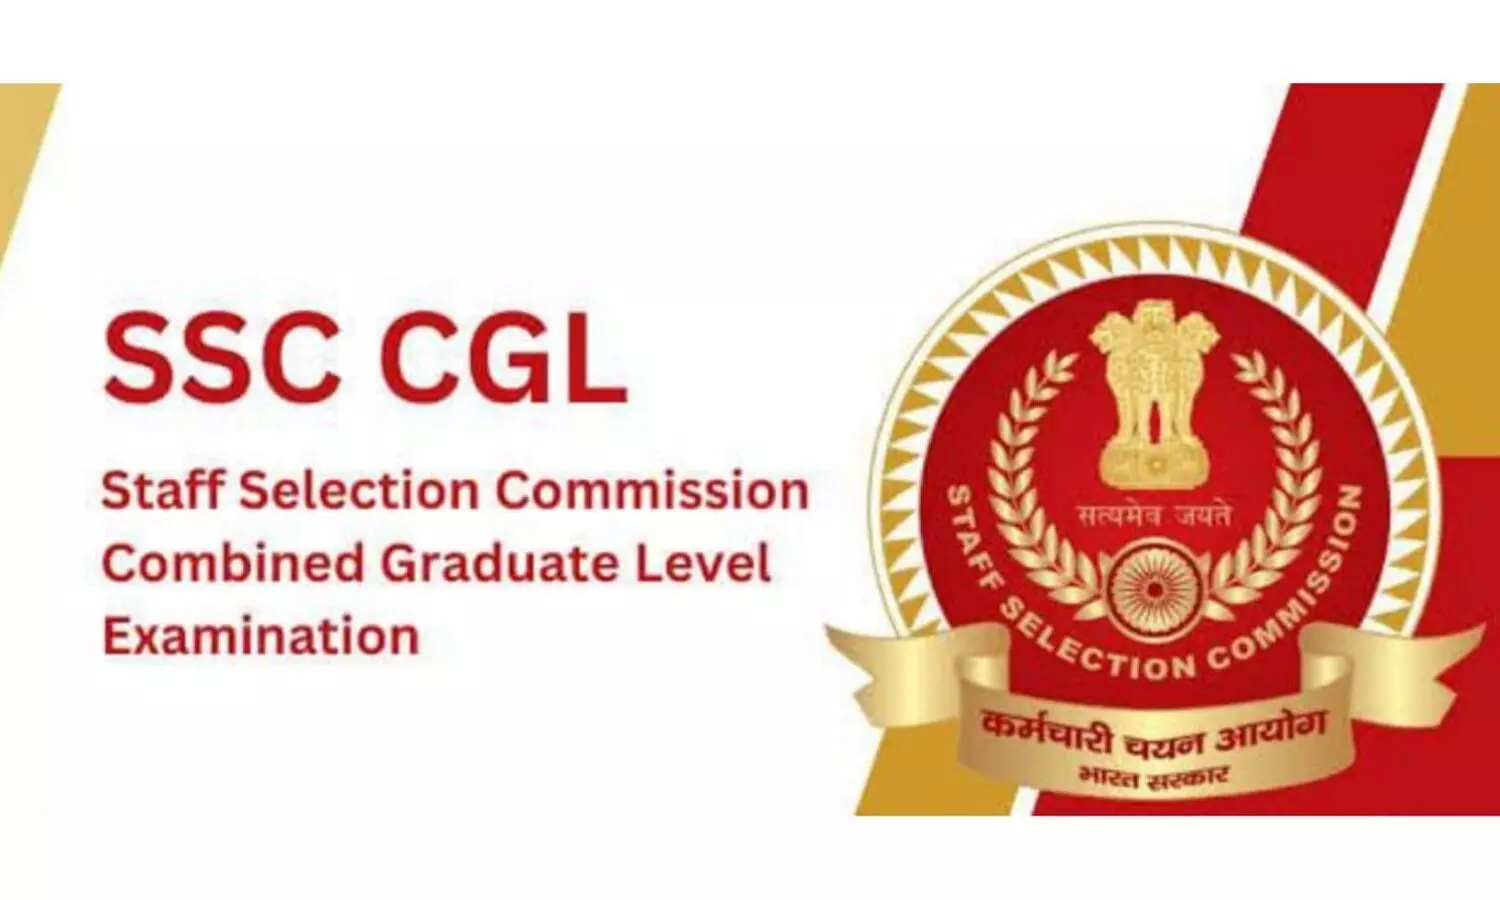 Staff Selection Commission to conduct Combined Graduate Level examination from July 14 to July 27